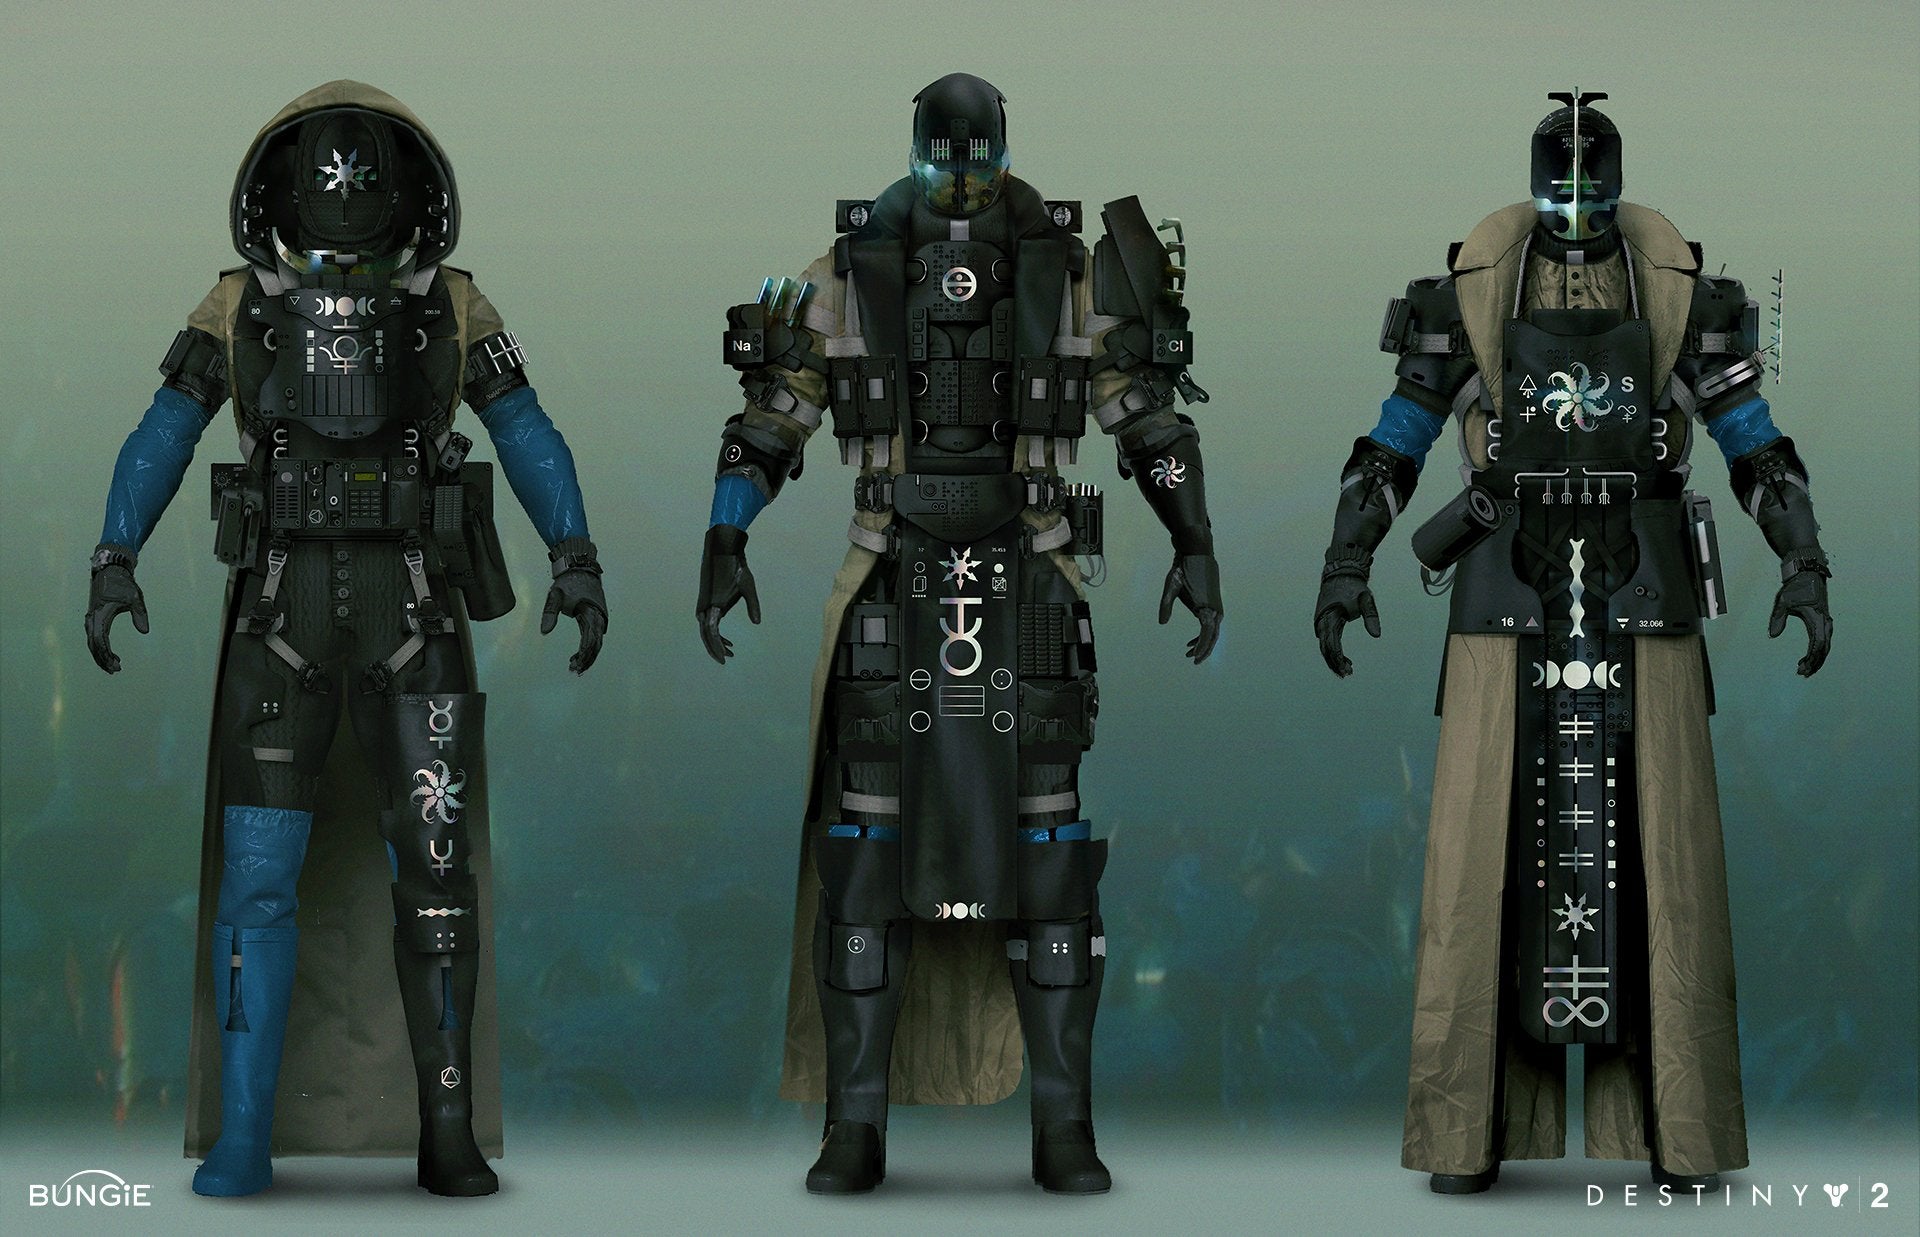 Concept art for Destiny 2: The Witch Queen armour, apparently called Nova gear.